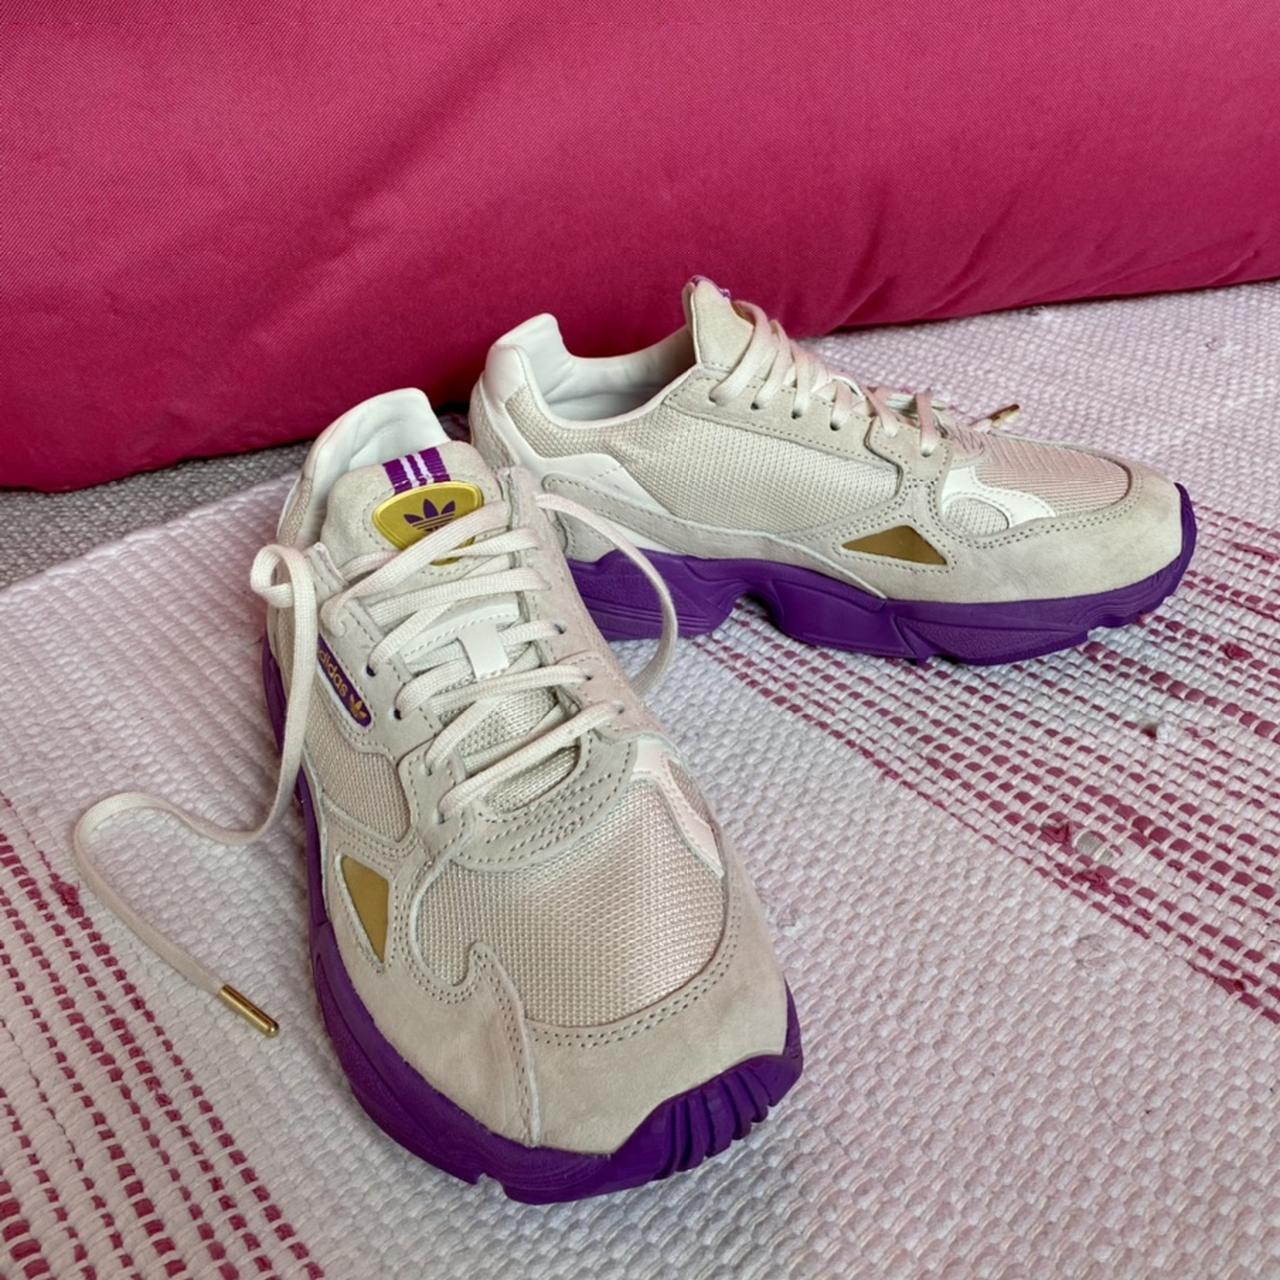 Adidas Purple and White Trainers |